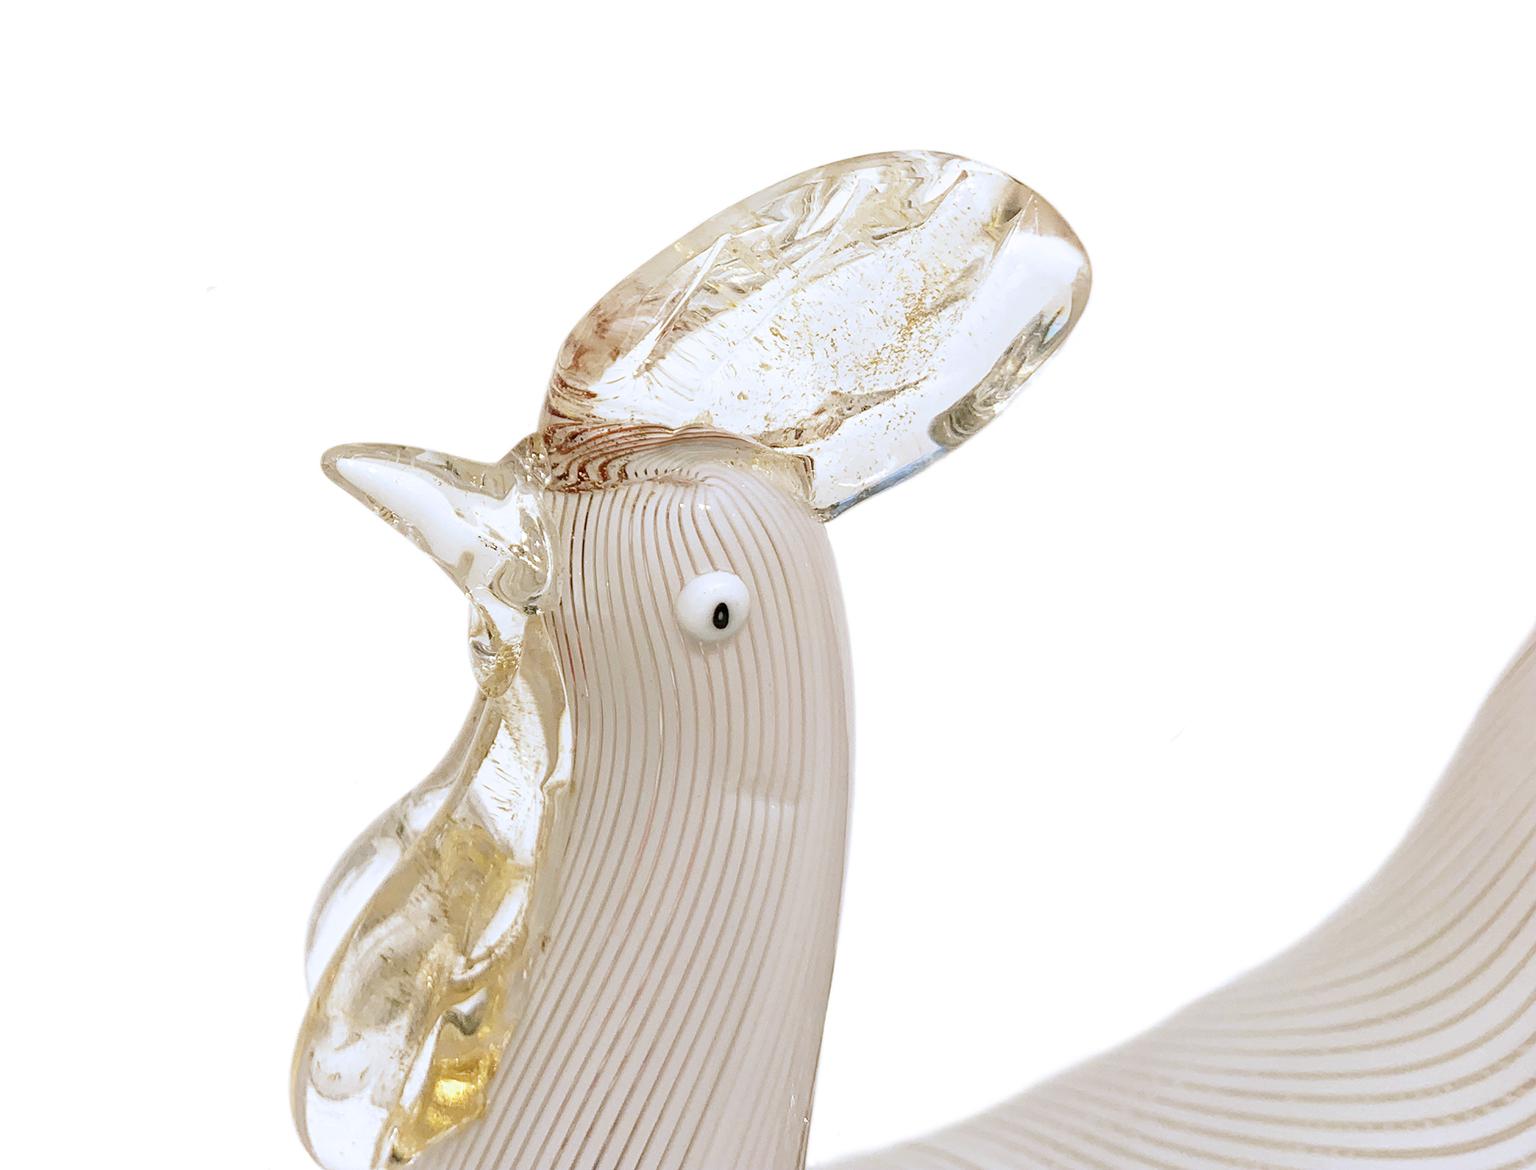 Mid-20th Century Murano Glass Rooster-Shaped Sculpture, Dino Martens, Venice Aureliano Toso, 1954 For Sale